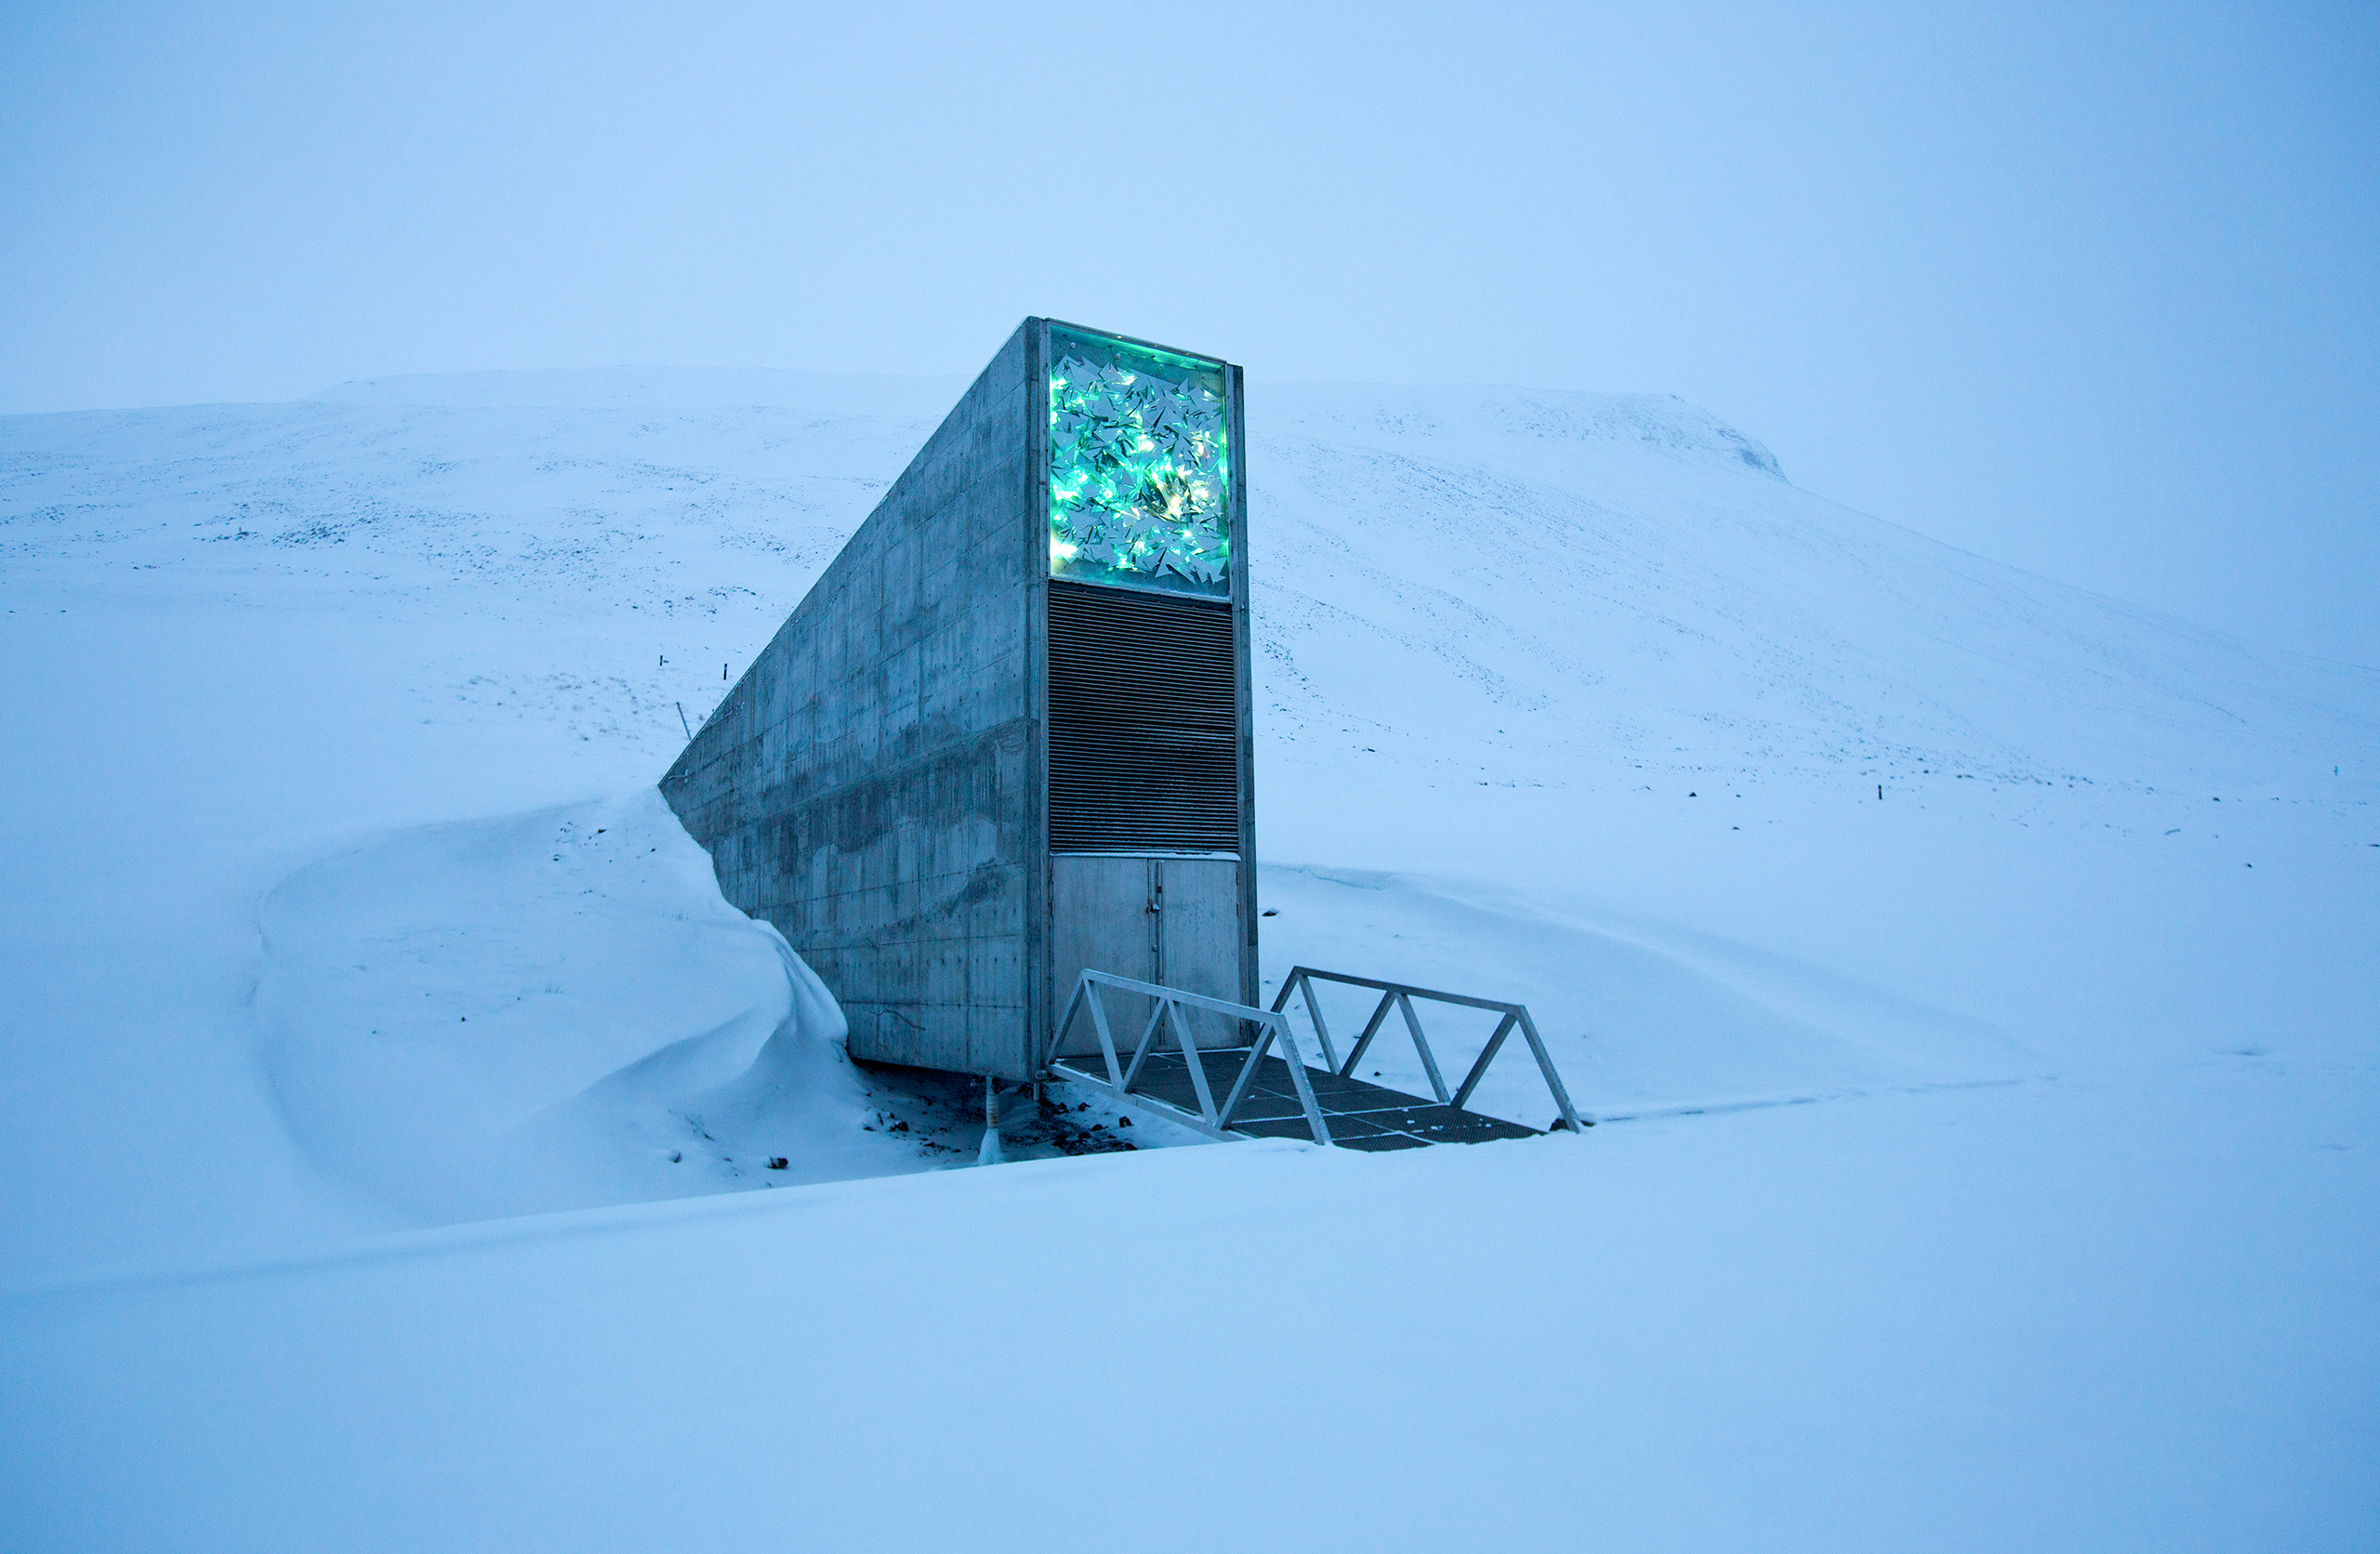 The entrance to the Svalbard Global Seed Vault